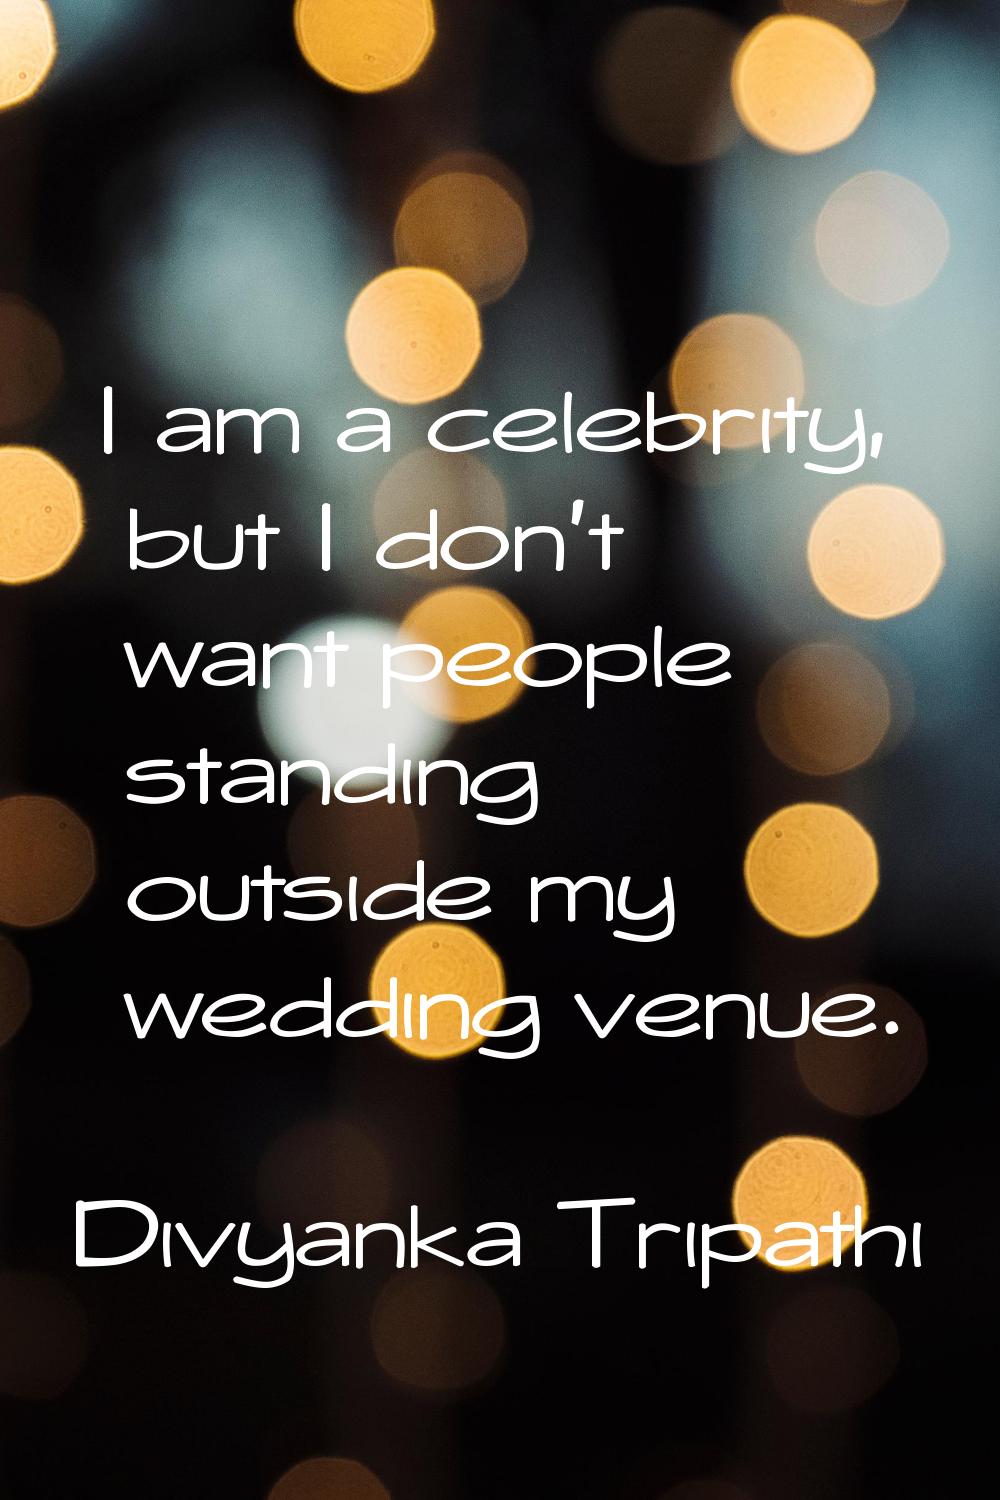 I am a celebrity, but I don't want people standing outside my wedding venue.